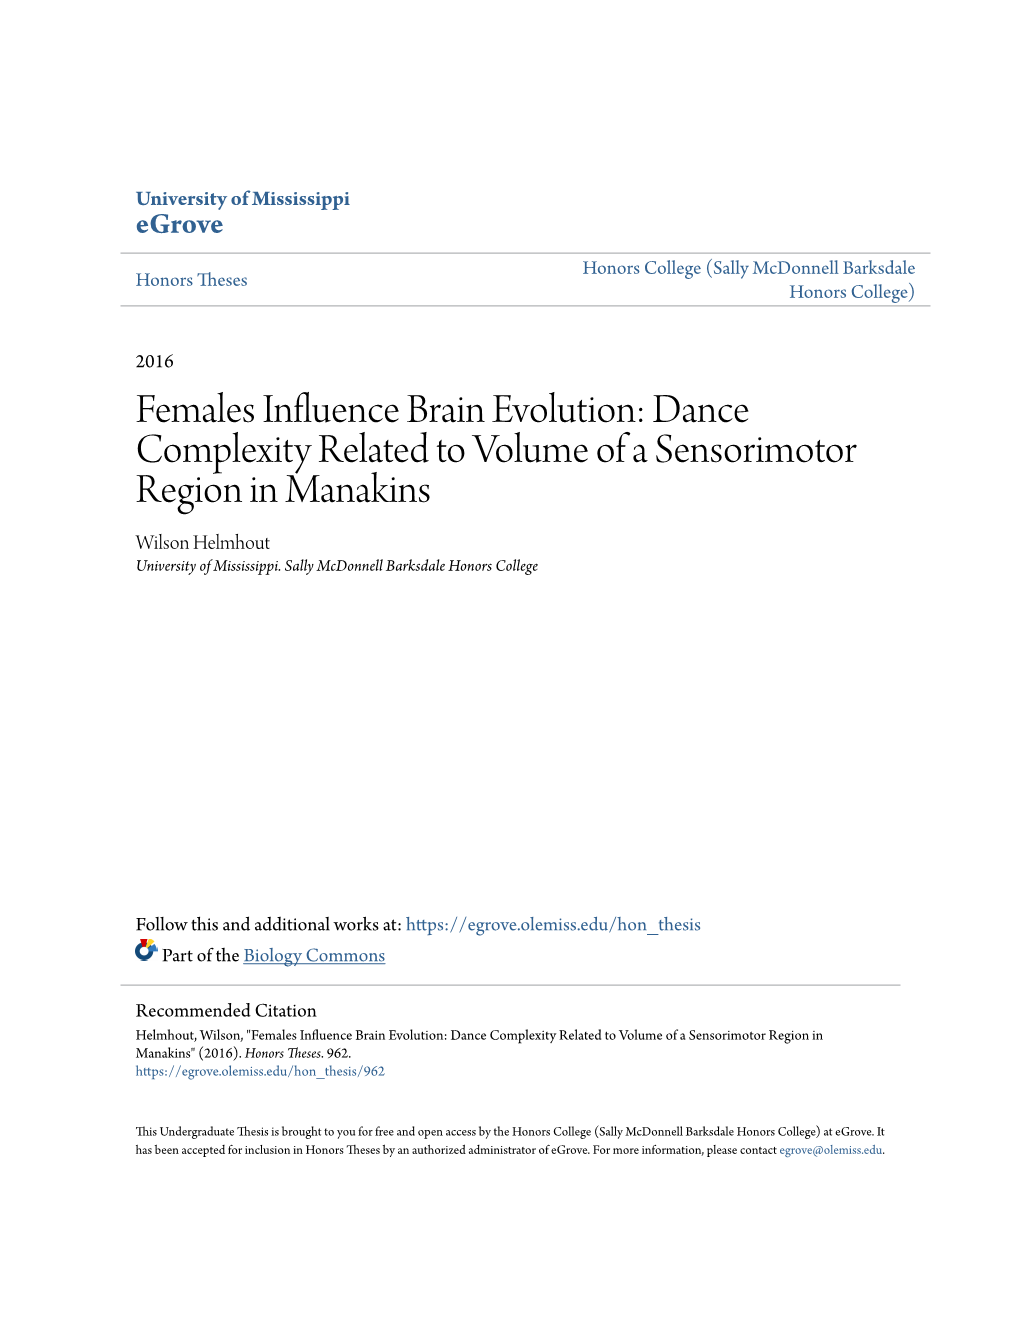 Females Influence Brain Evolution: Dance Complexity Related to Volume of a Sensorimotor Region in Manakins Wilson Helmhout University of Mississippi